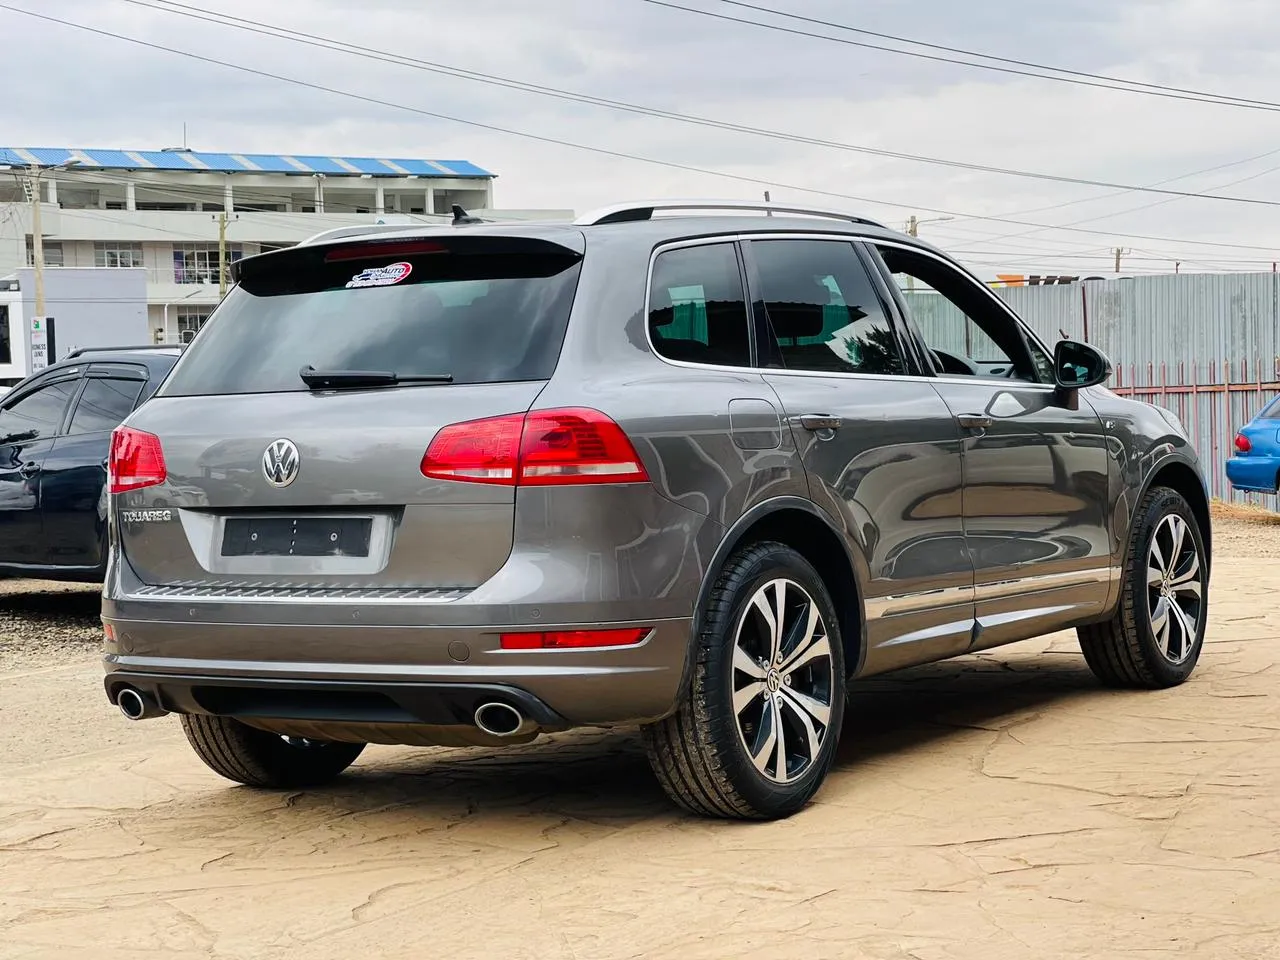 Volkswagen Touareg R-LINE 2014 Fully LOADED New Hire Purchase OK Wow